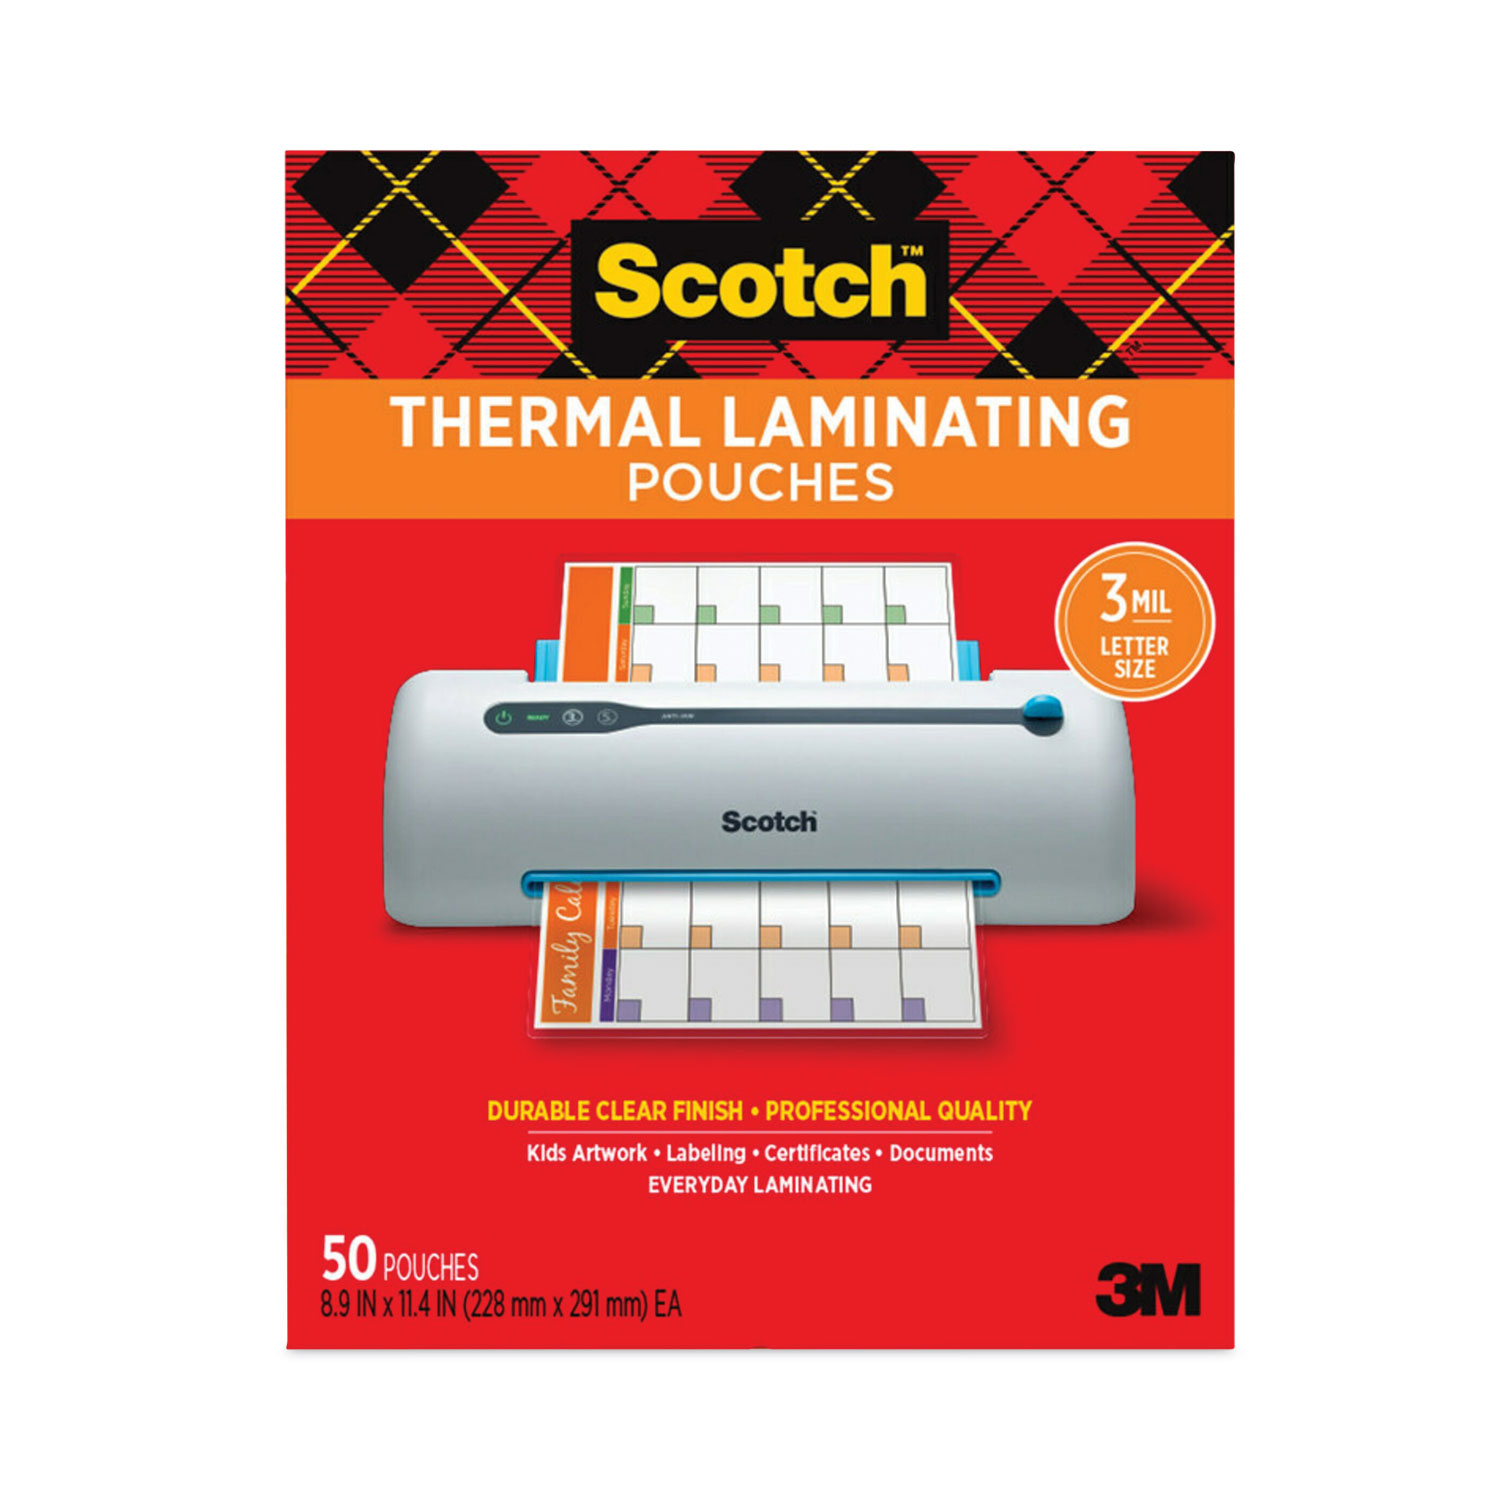 50 Letter 3 Mil Laminating Pouches Laminator Sheets 9 x 11-1/2 Scotch Quality 